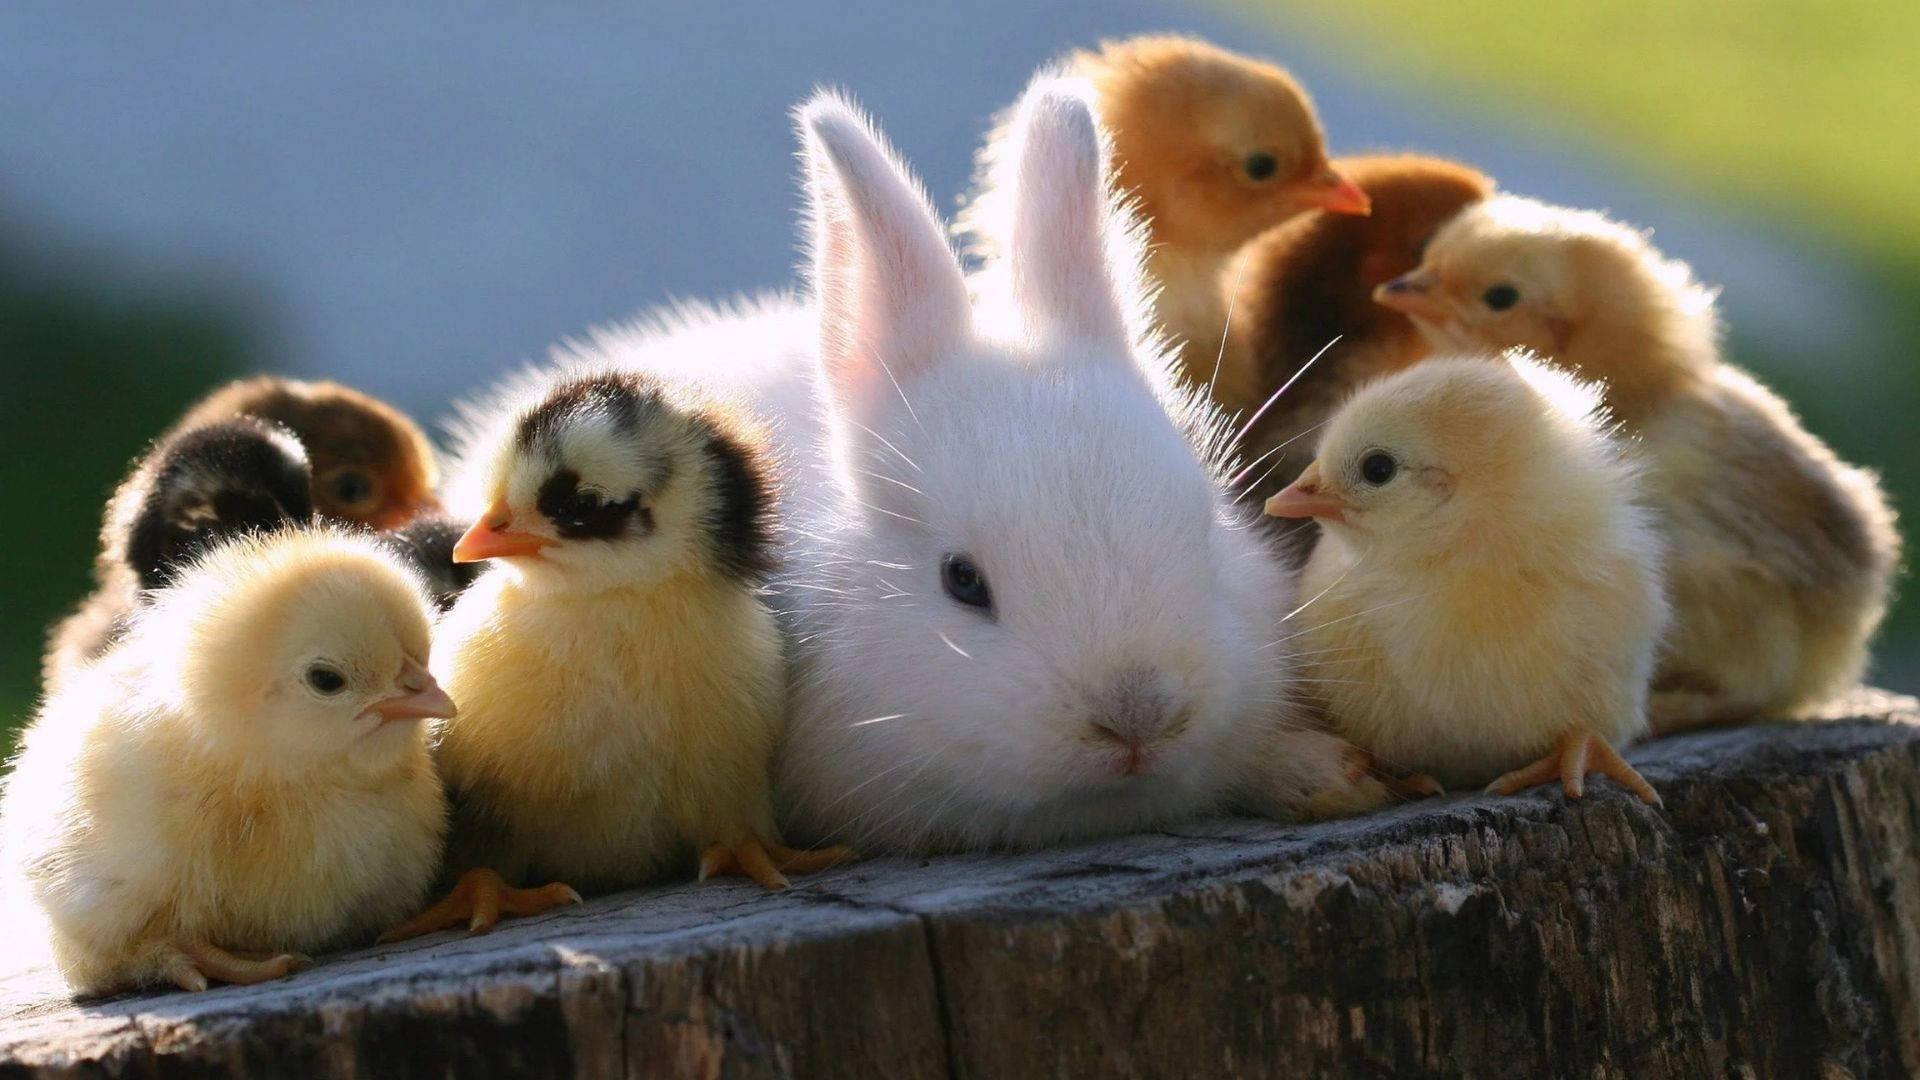 Bunny With Baby Chick Animals Wallpaper